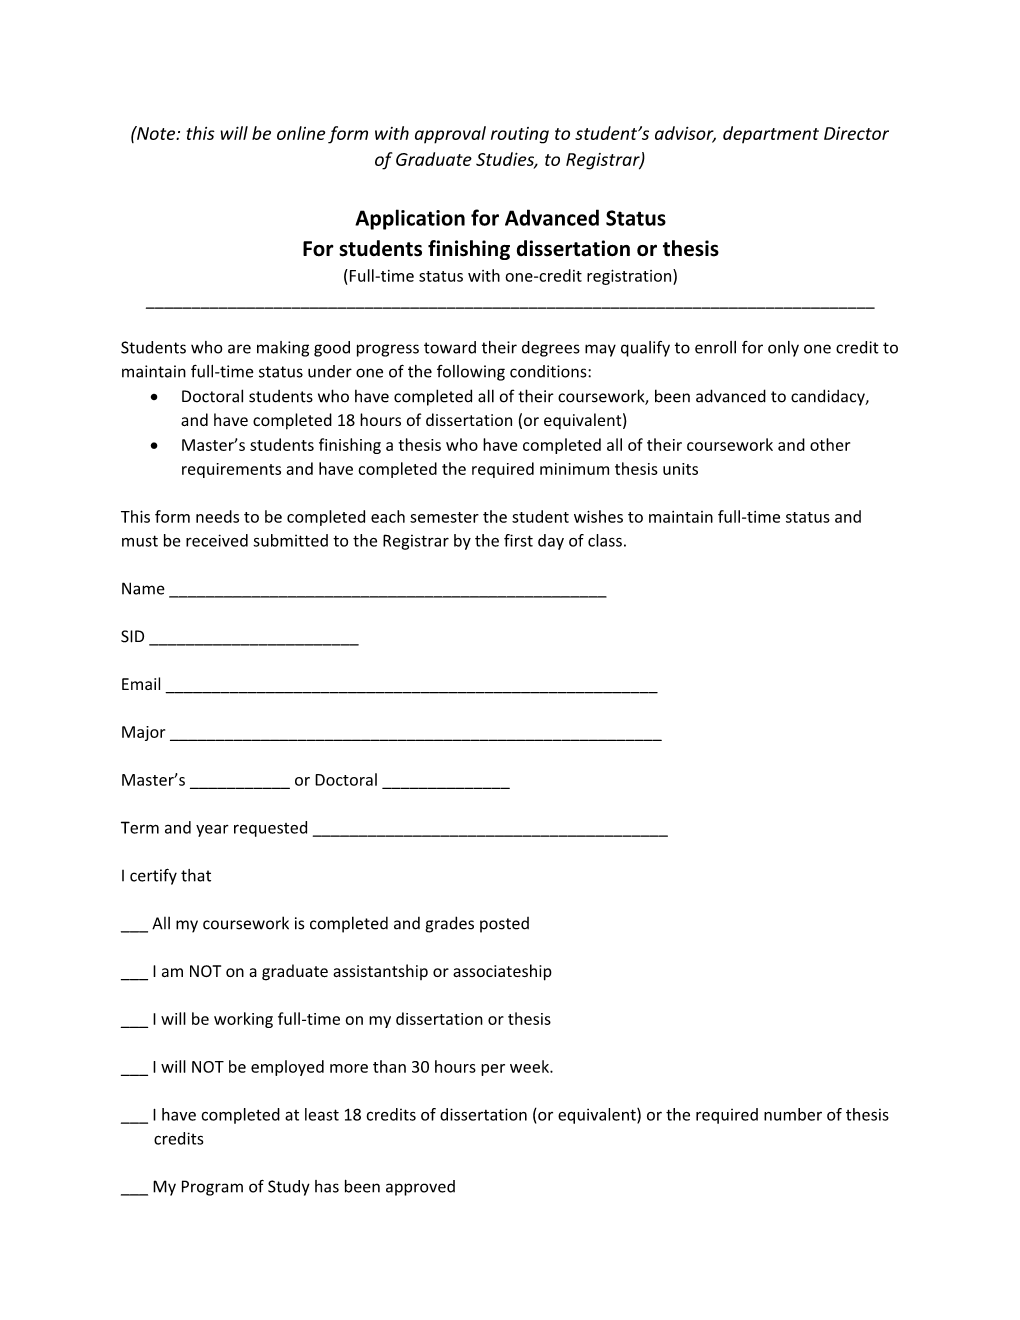 Application for Advanced Status